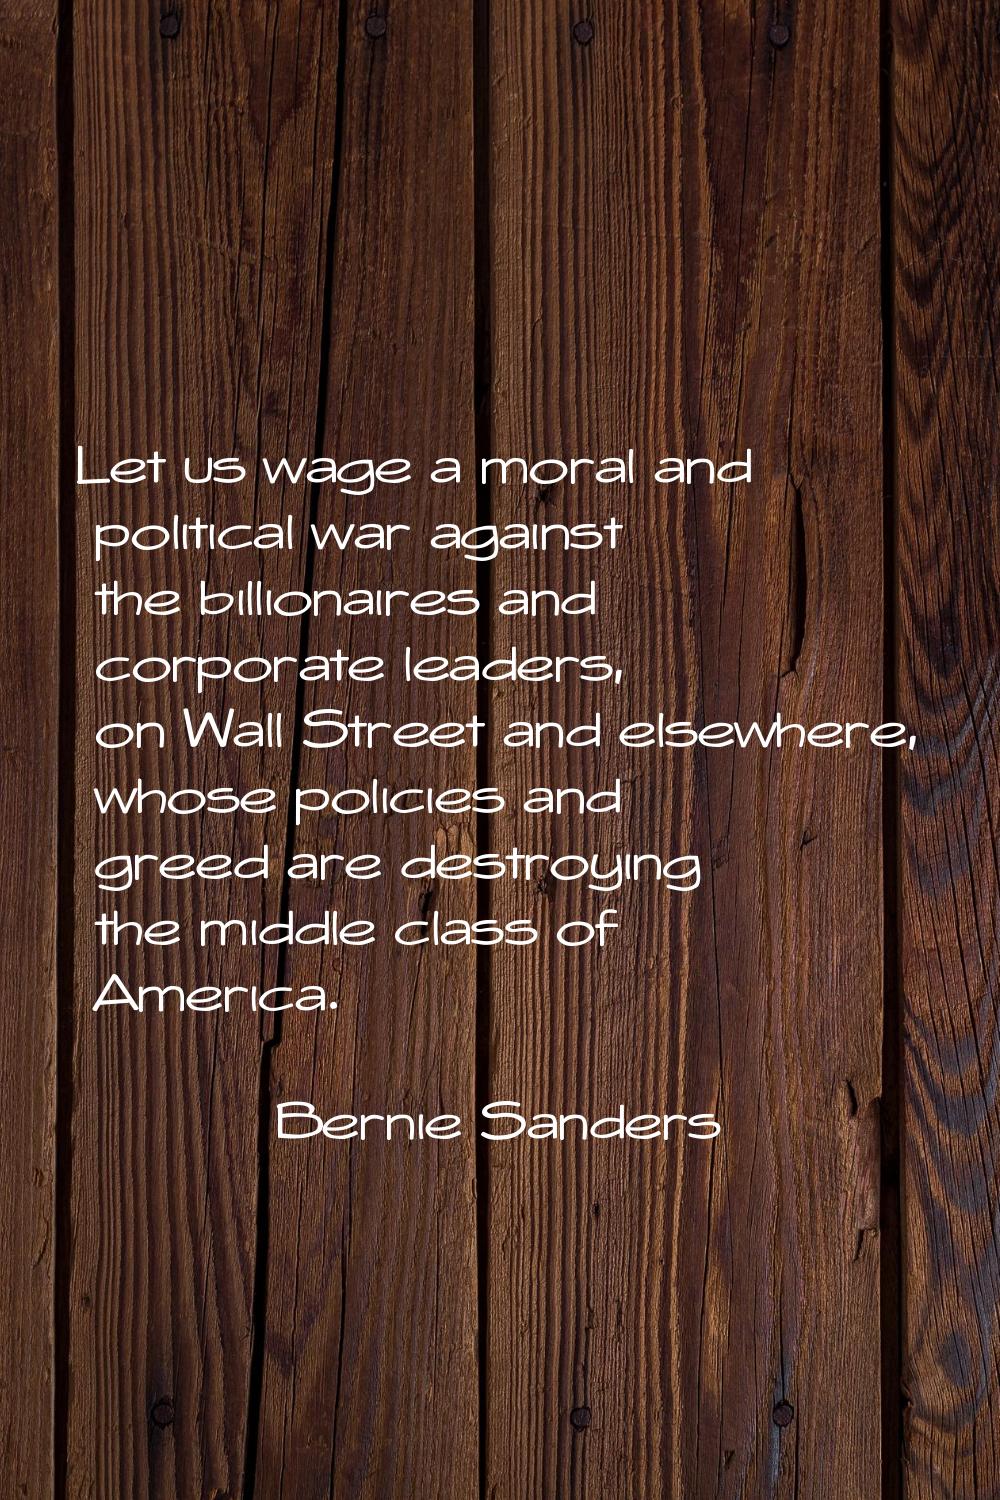 Let us wage a moral and political war against the billionaires and corporate leaders, on Wall Stree